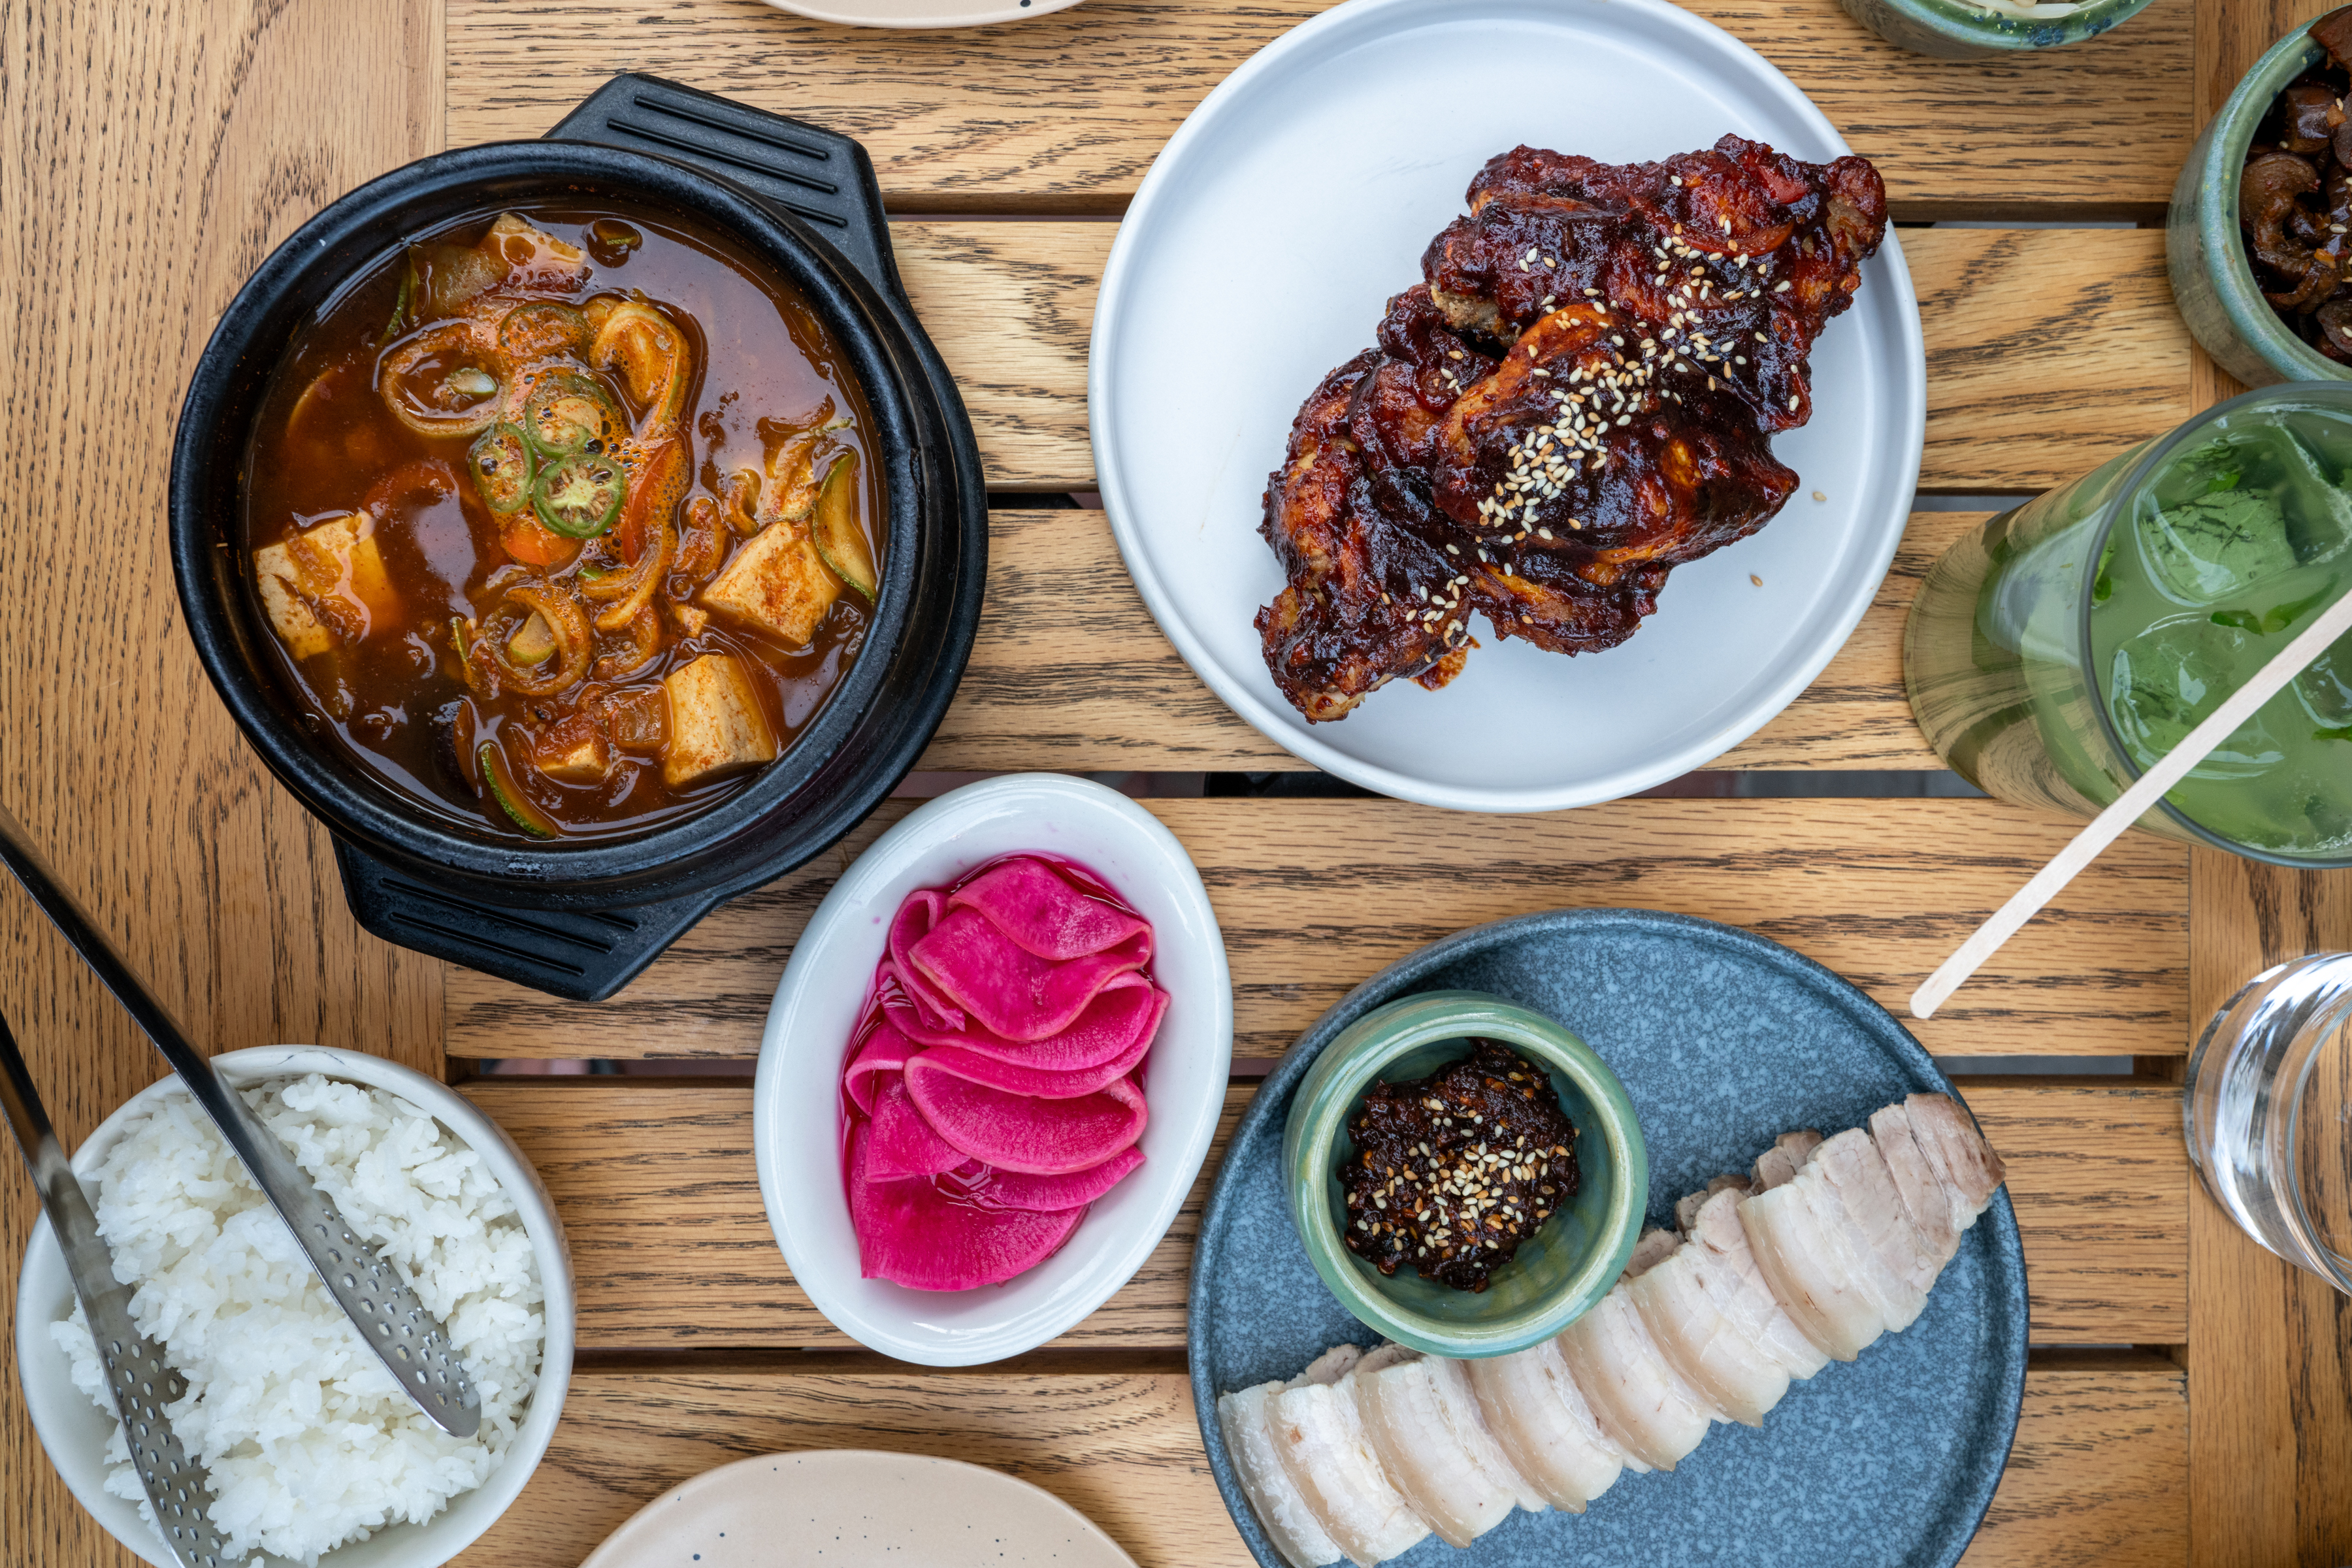 From above, a table laid with a spicy stew, glazed meat, pickled radishes, and other dishes.